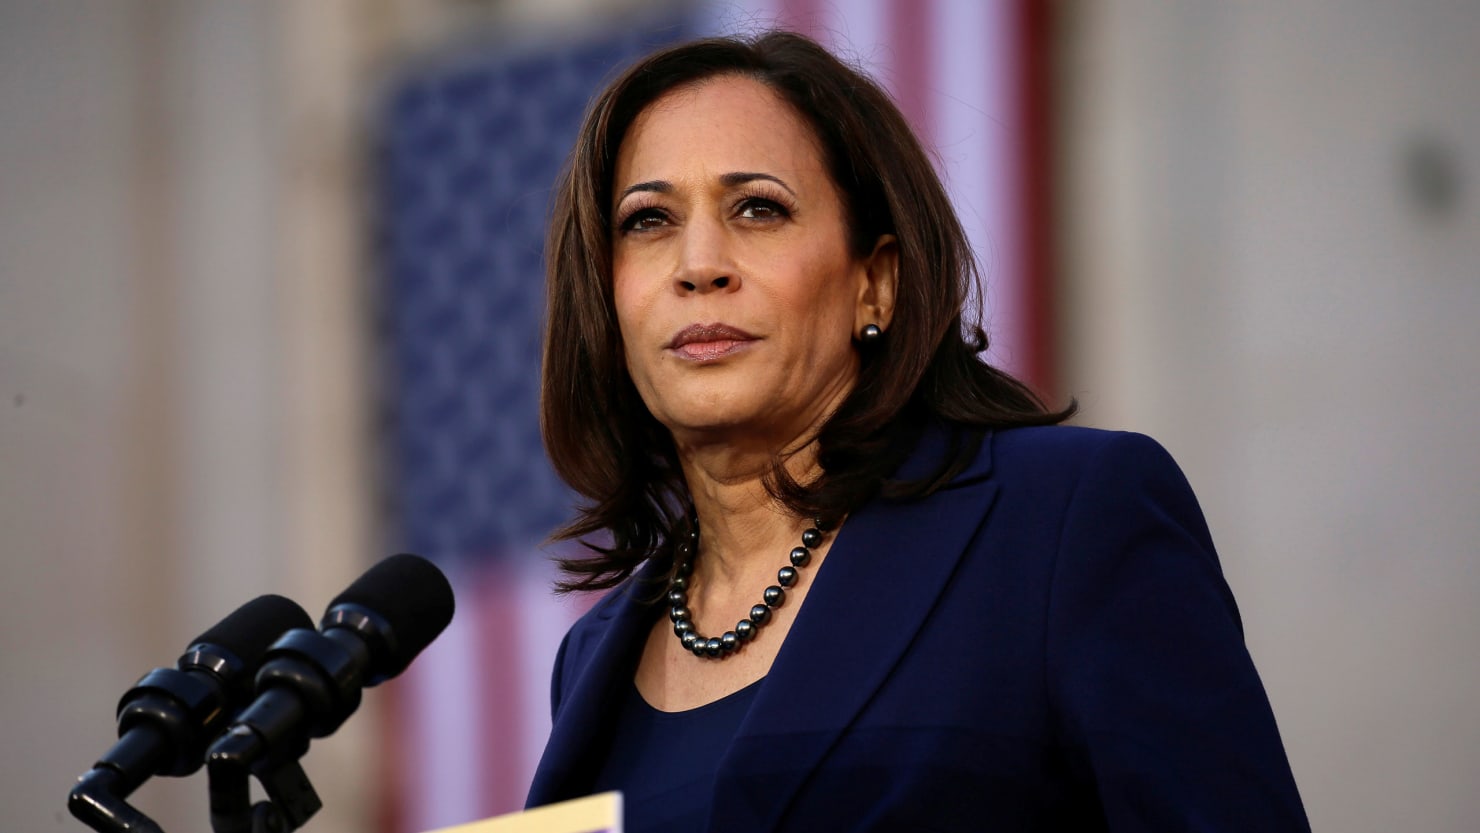 Trump Keeps Quiet on Kamala Harris While Dems Fret Over Her First Campaign Bump